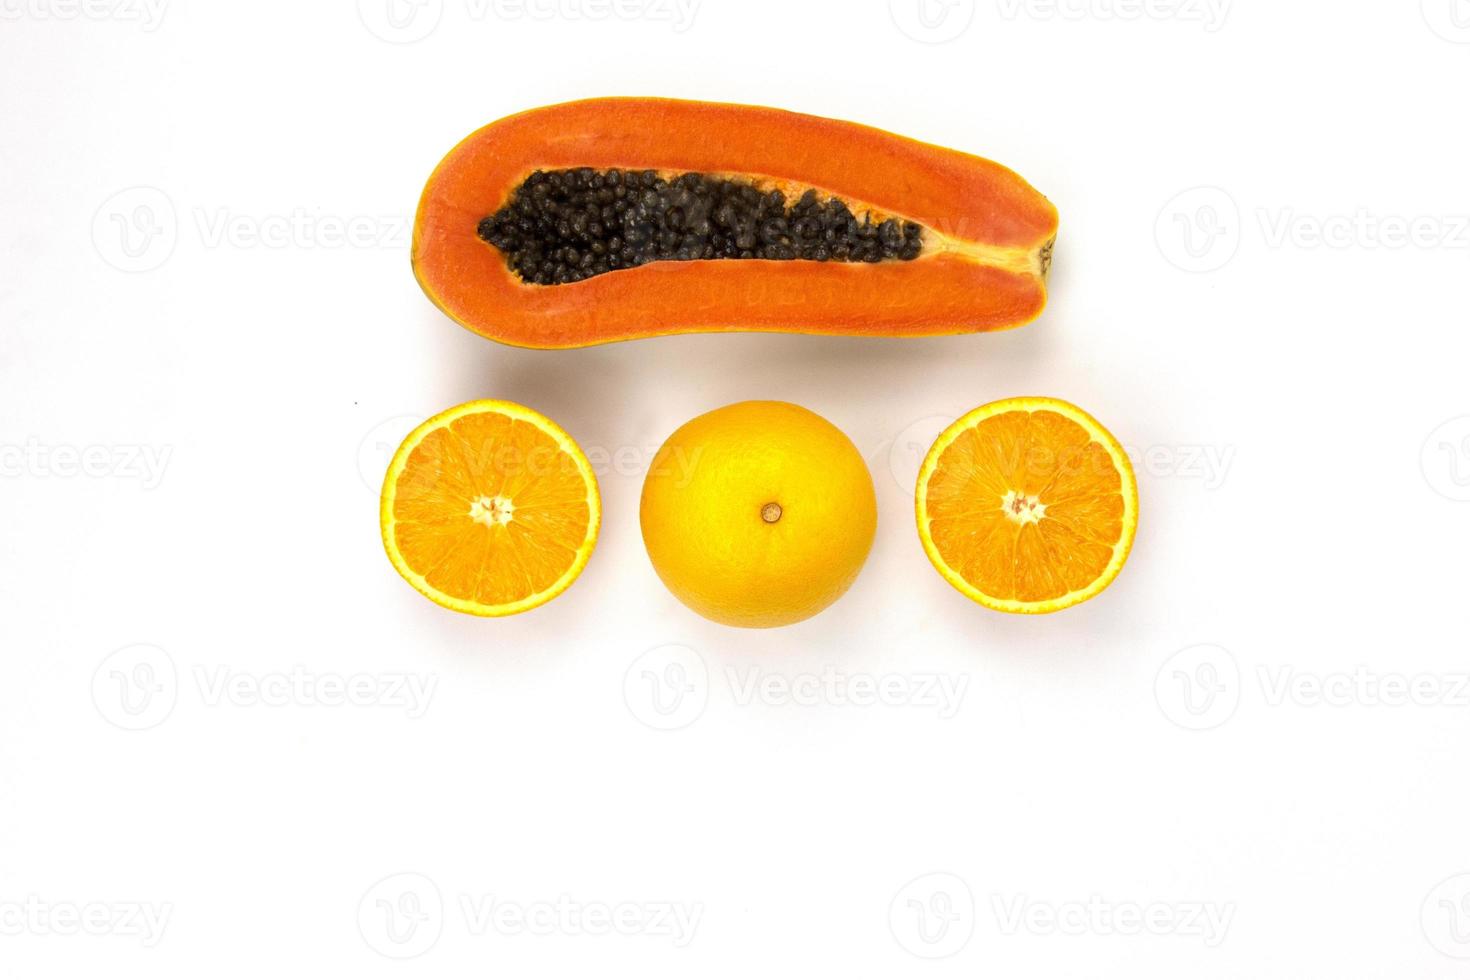 Juicy Oranges cut isolated and a piece of papaya sliced arranged in the center of white background, Healthy fruits photography concepts, top view design photo